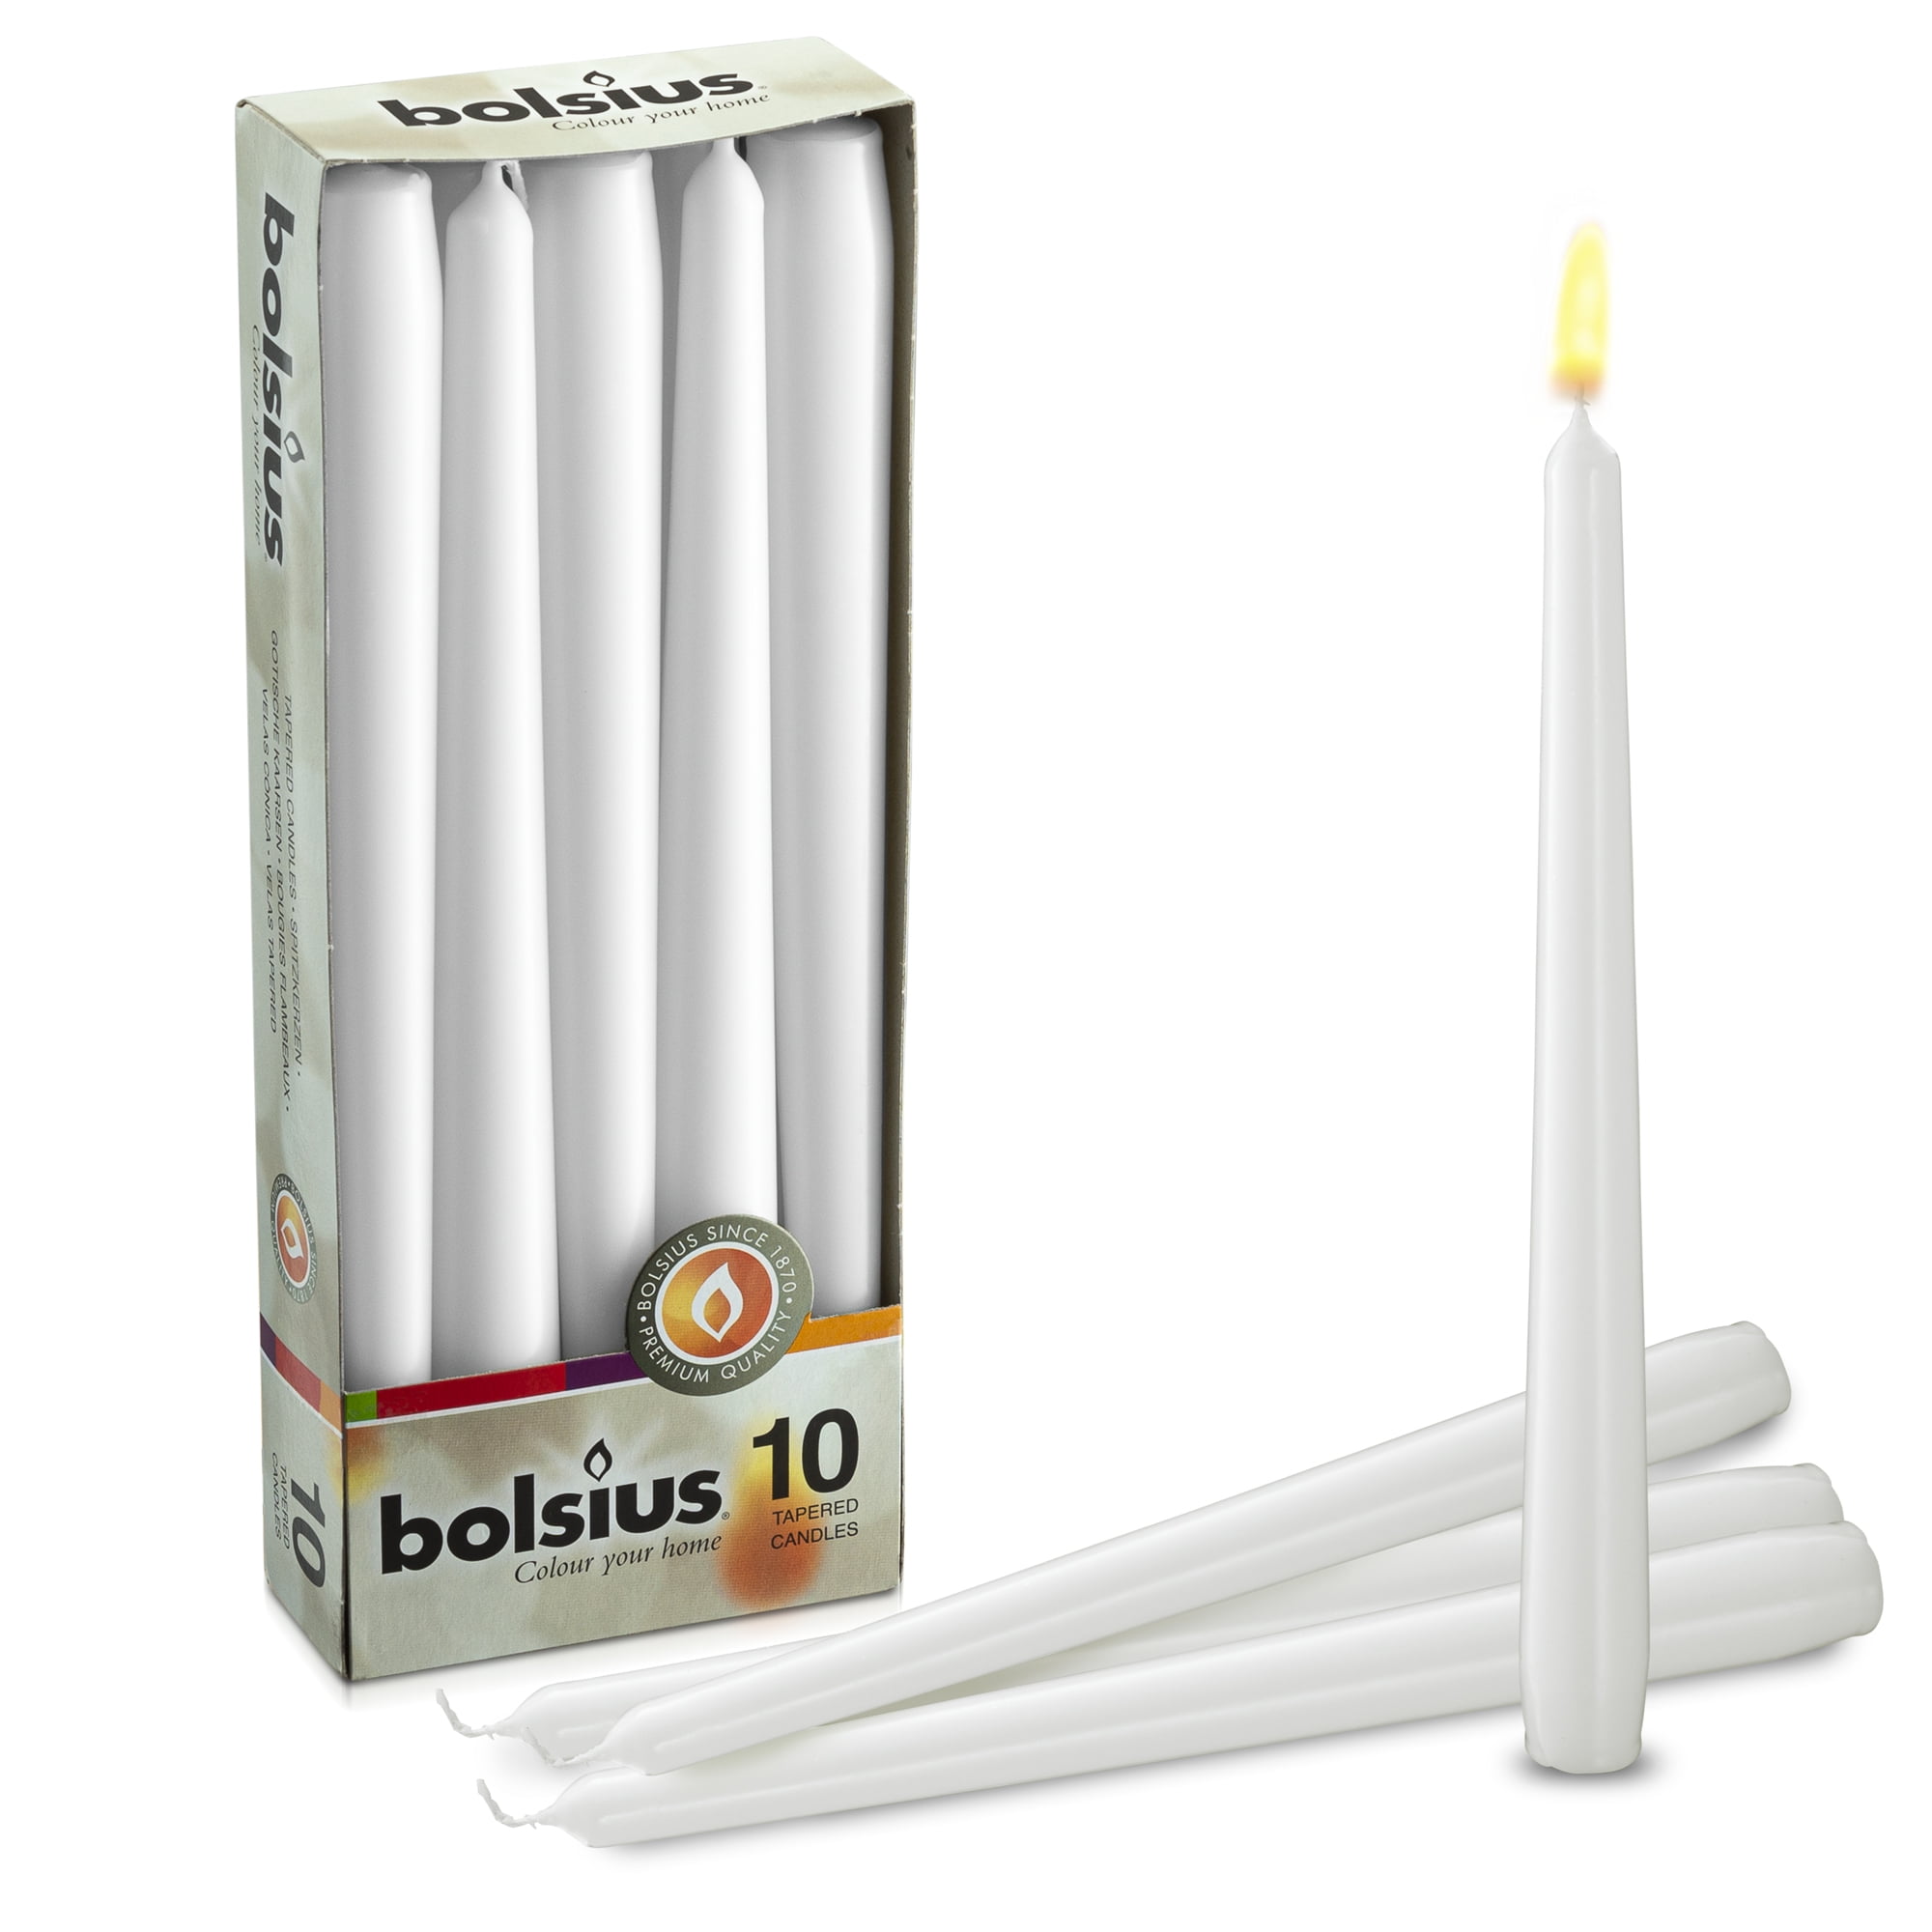 6 x 20 PACK 5HOUR BURN TIME!! 120 PREMIUM BOLSIUS WHITE FLOATING CANDLES 